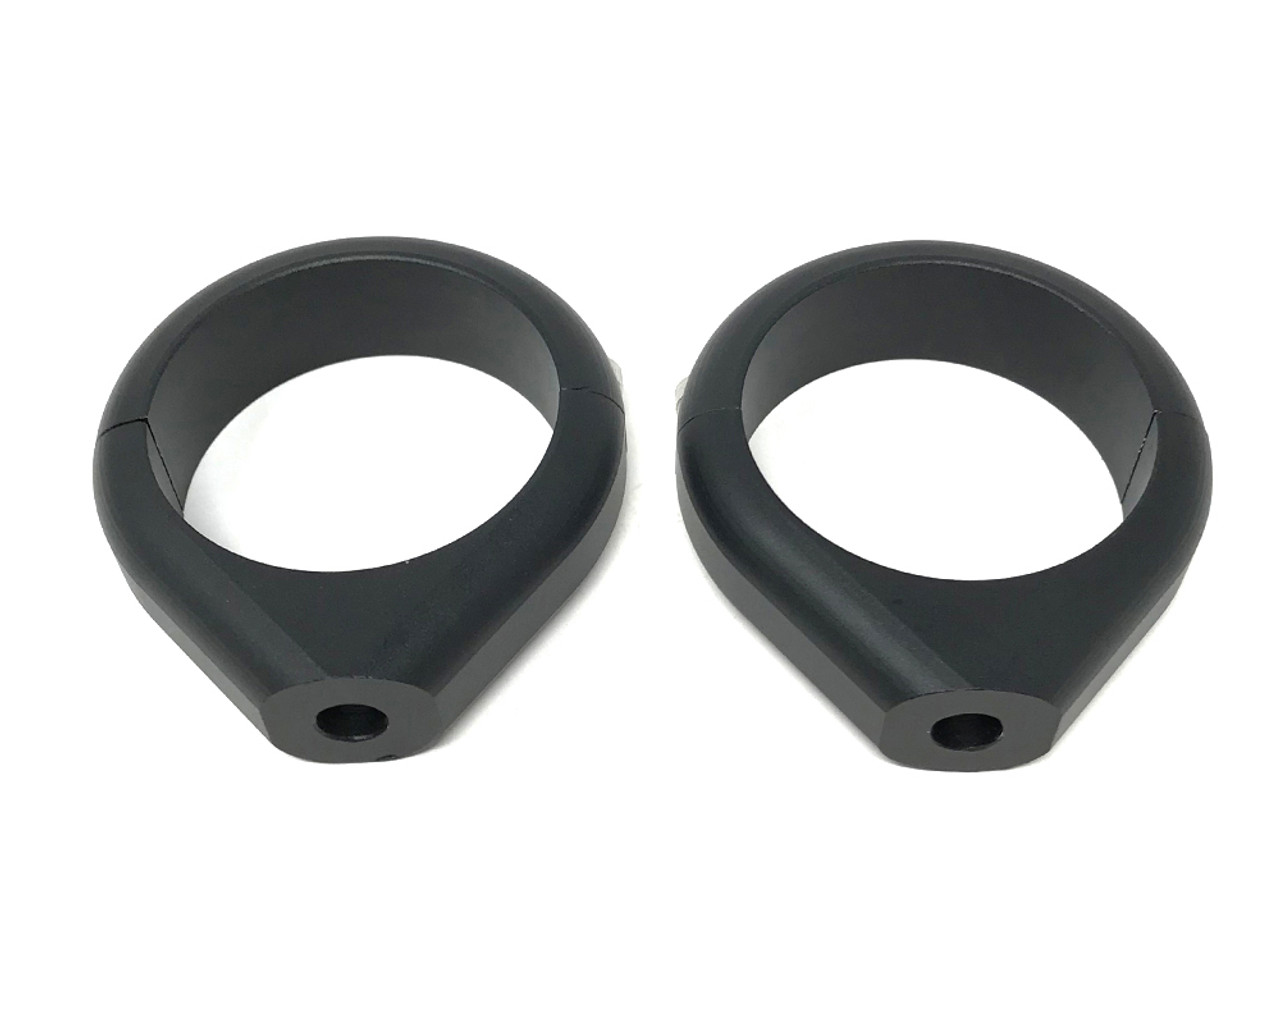 Motorbike Indicator Relocator Fork Clamps - Black - High Quality